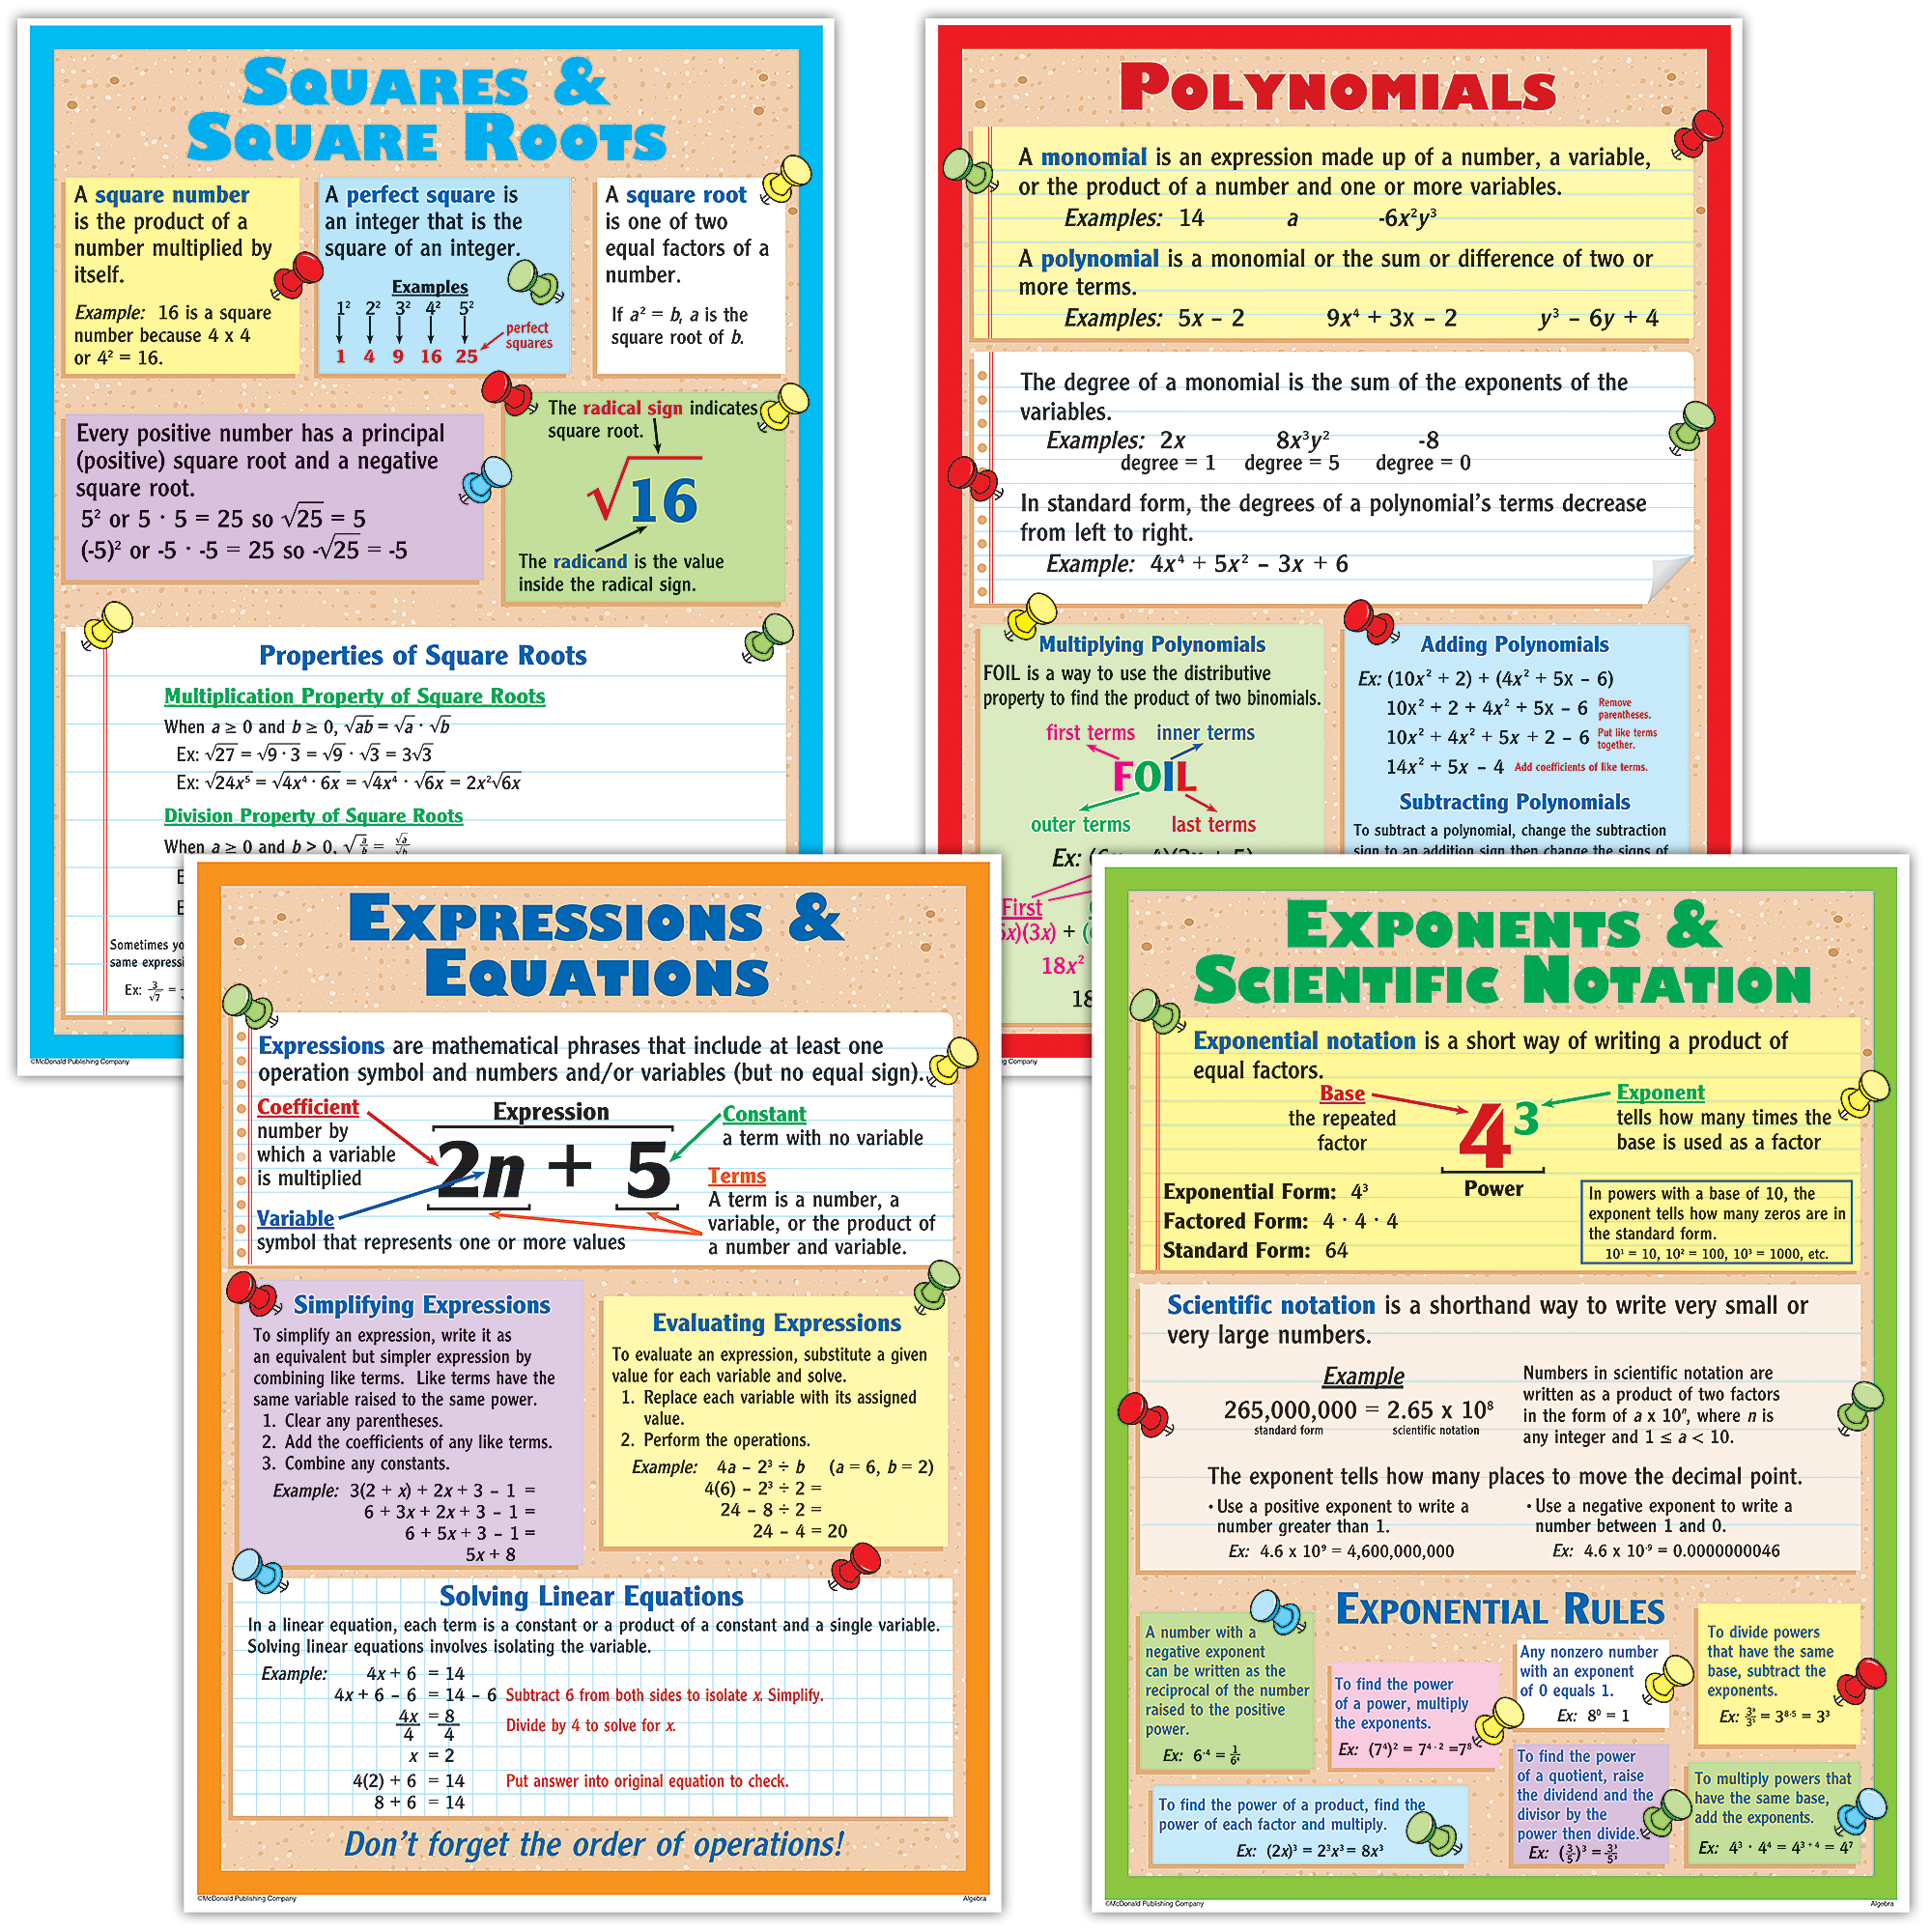 These colorful posters present important information about polynomials, squares and square roots, expressions and equations, and exponents and scientific notation. Package includes 4 posters, 4 reproducible activity sheets, and a teacher’s guide.